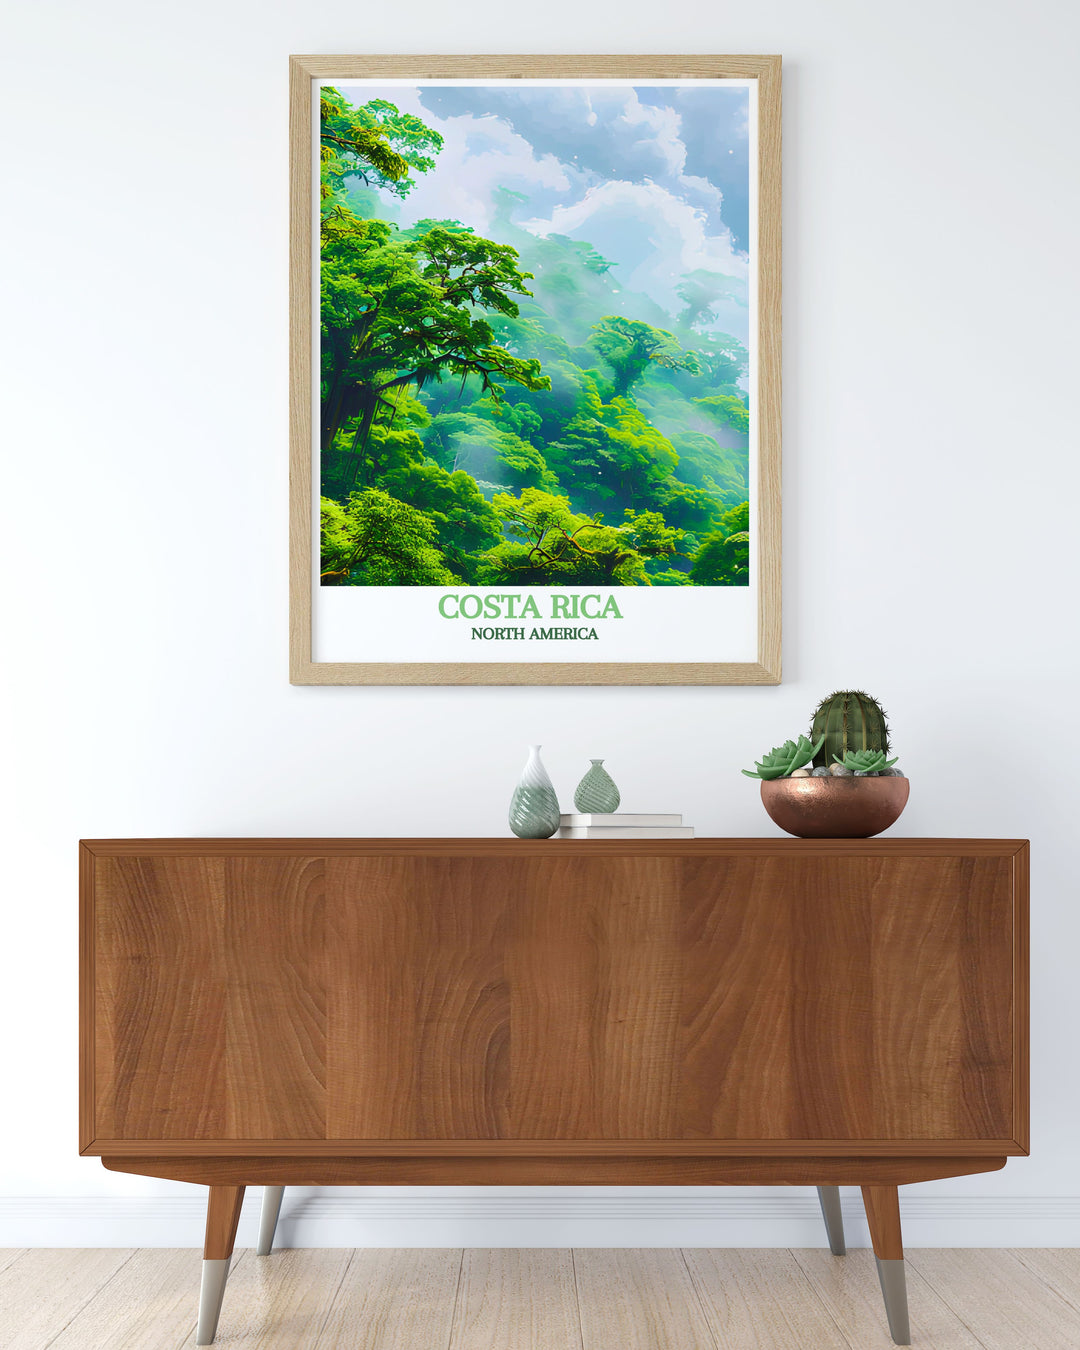 Beautiful Costa Rica travel poster capturing the scenic beauty of Monteverde Cloud Forest and the tranquil vibe of Saint Teresa, perfect for enhancing your home or office with Costa Ricas iconic landscapes.